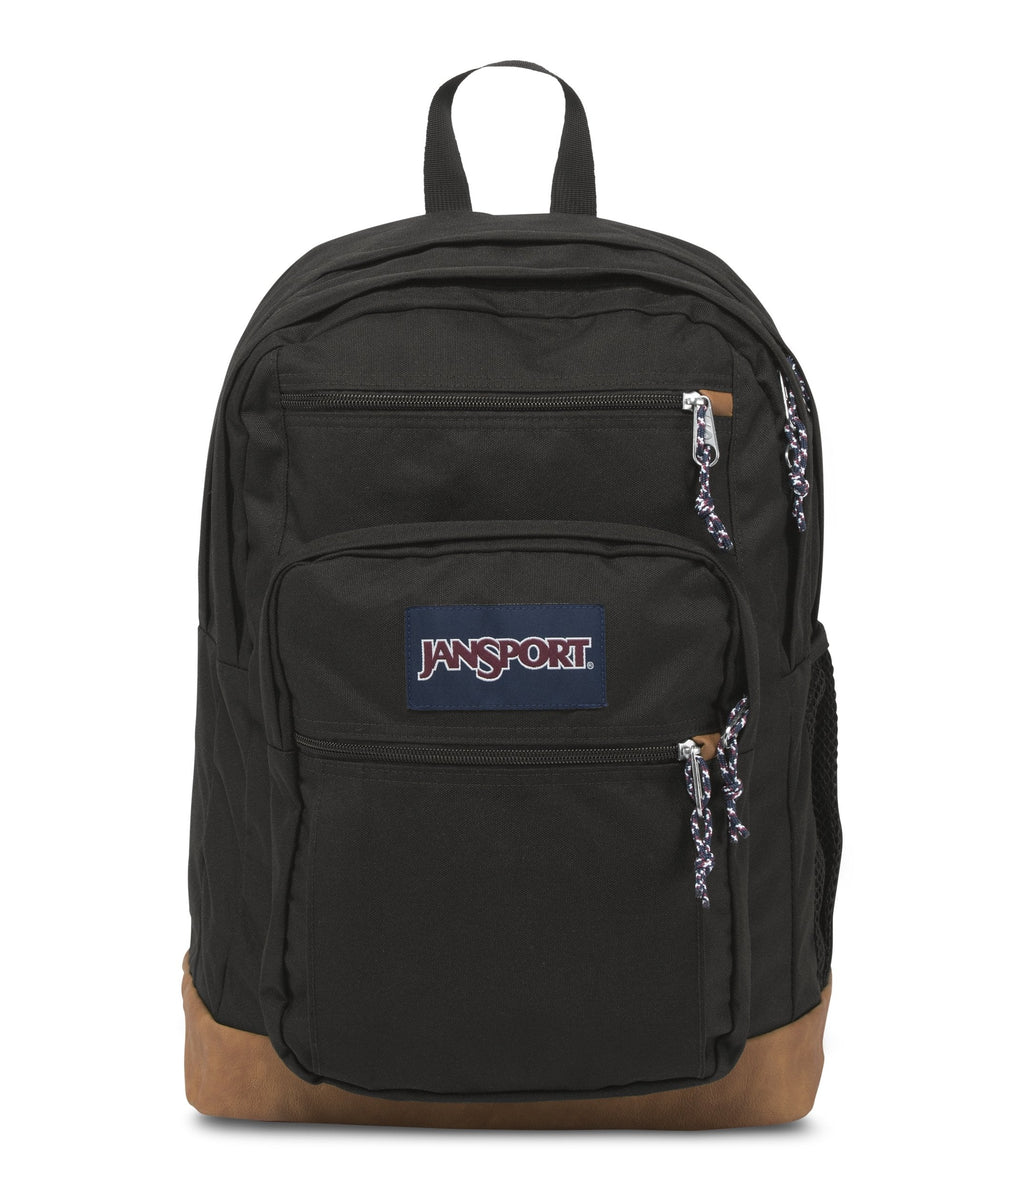 JanSport Cool Backpack, with 15-inch Laptop Sleeve, Black - Large Computer Bag Rucksack with 2 Compartments, Ergonomic Straps, JS0A2SDD008 One Size